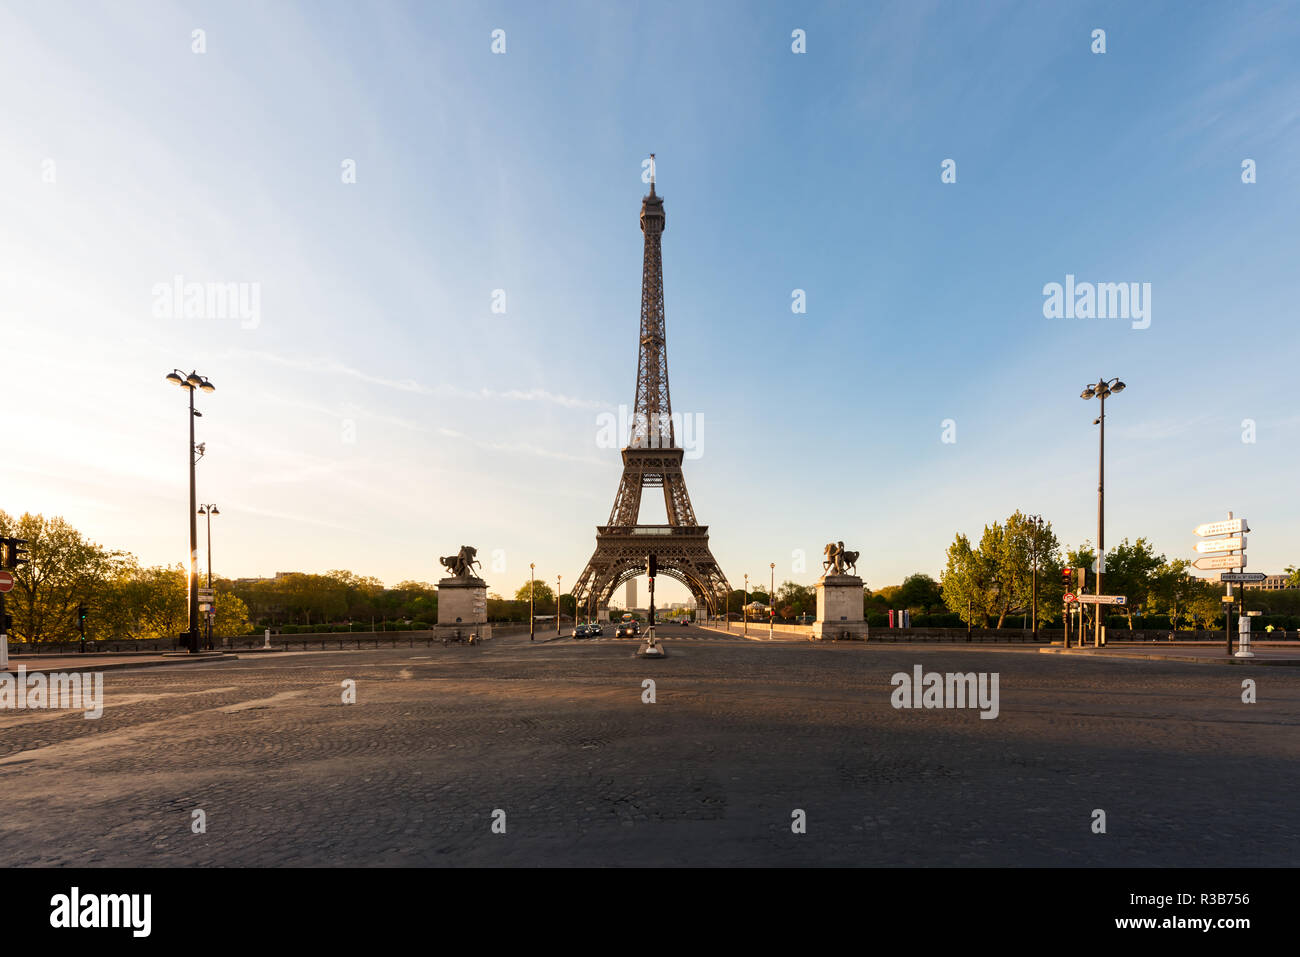 Eiffel Tower and river Seine at sunrise in Paris, France. Eiffel Tower is one of the most iconic landmarks of Paris. Stock Photo